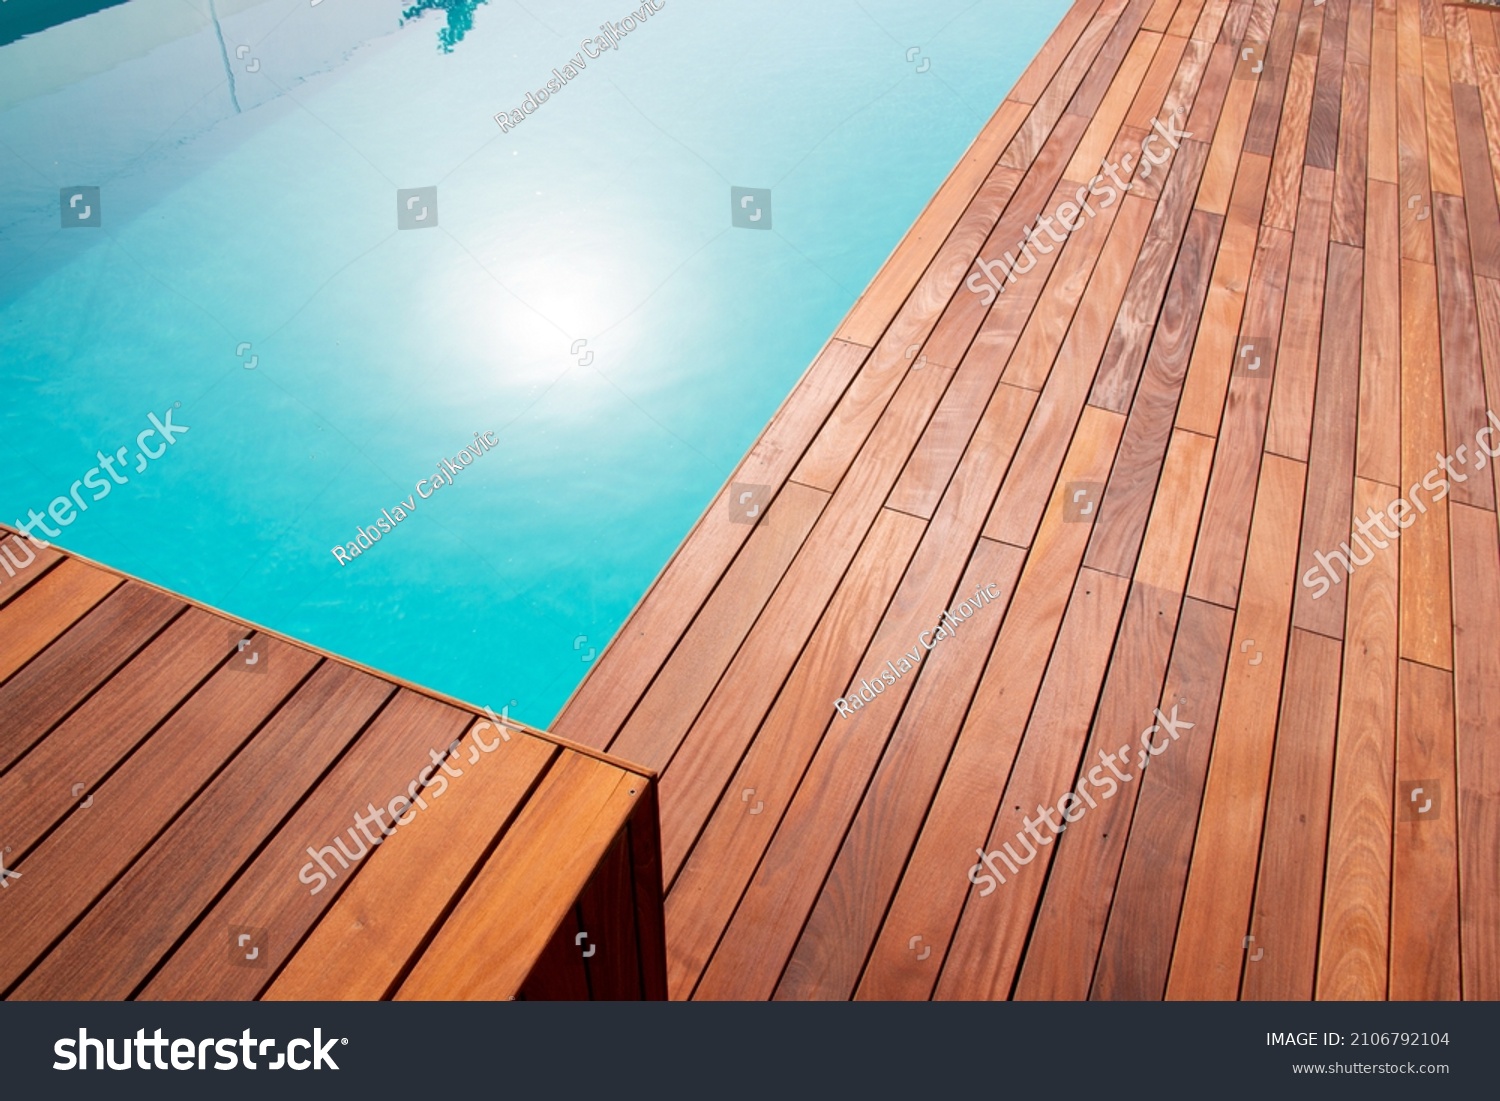 Texture with tiled wooden decorative planking, hardwood ipe pool deck shining sun reflecting on the water #2106792104